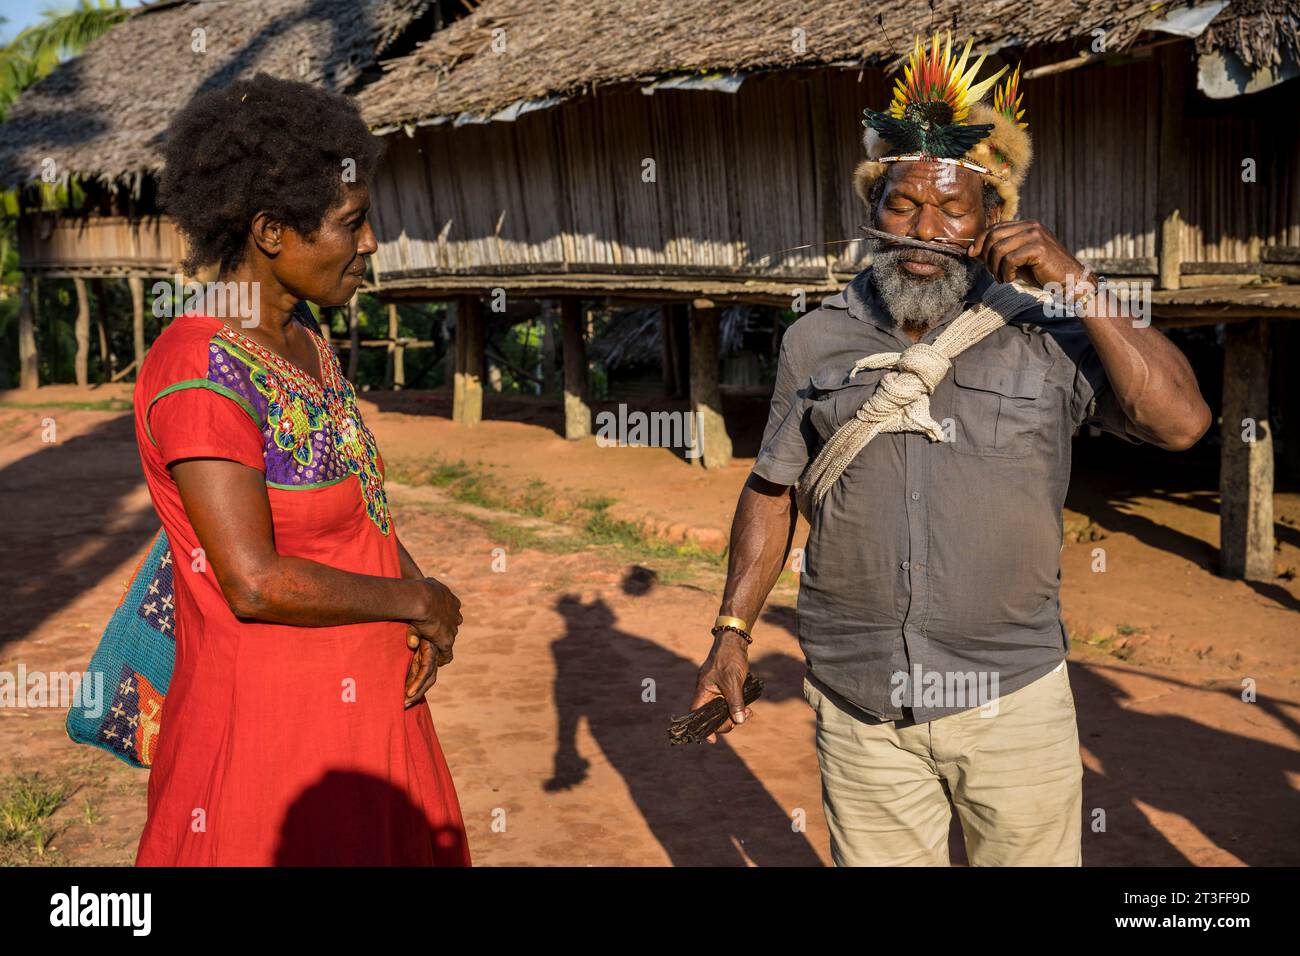 Papua New Guinea, Sepik province, chef Mundiya Kepanga accompanies vanilla specialist Nanda Siri during a vanilla cultivation training in agroforestry as part of the STREIT project funded by the European Union Stock Photo